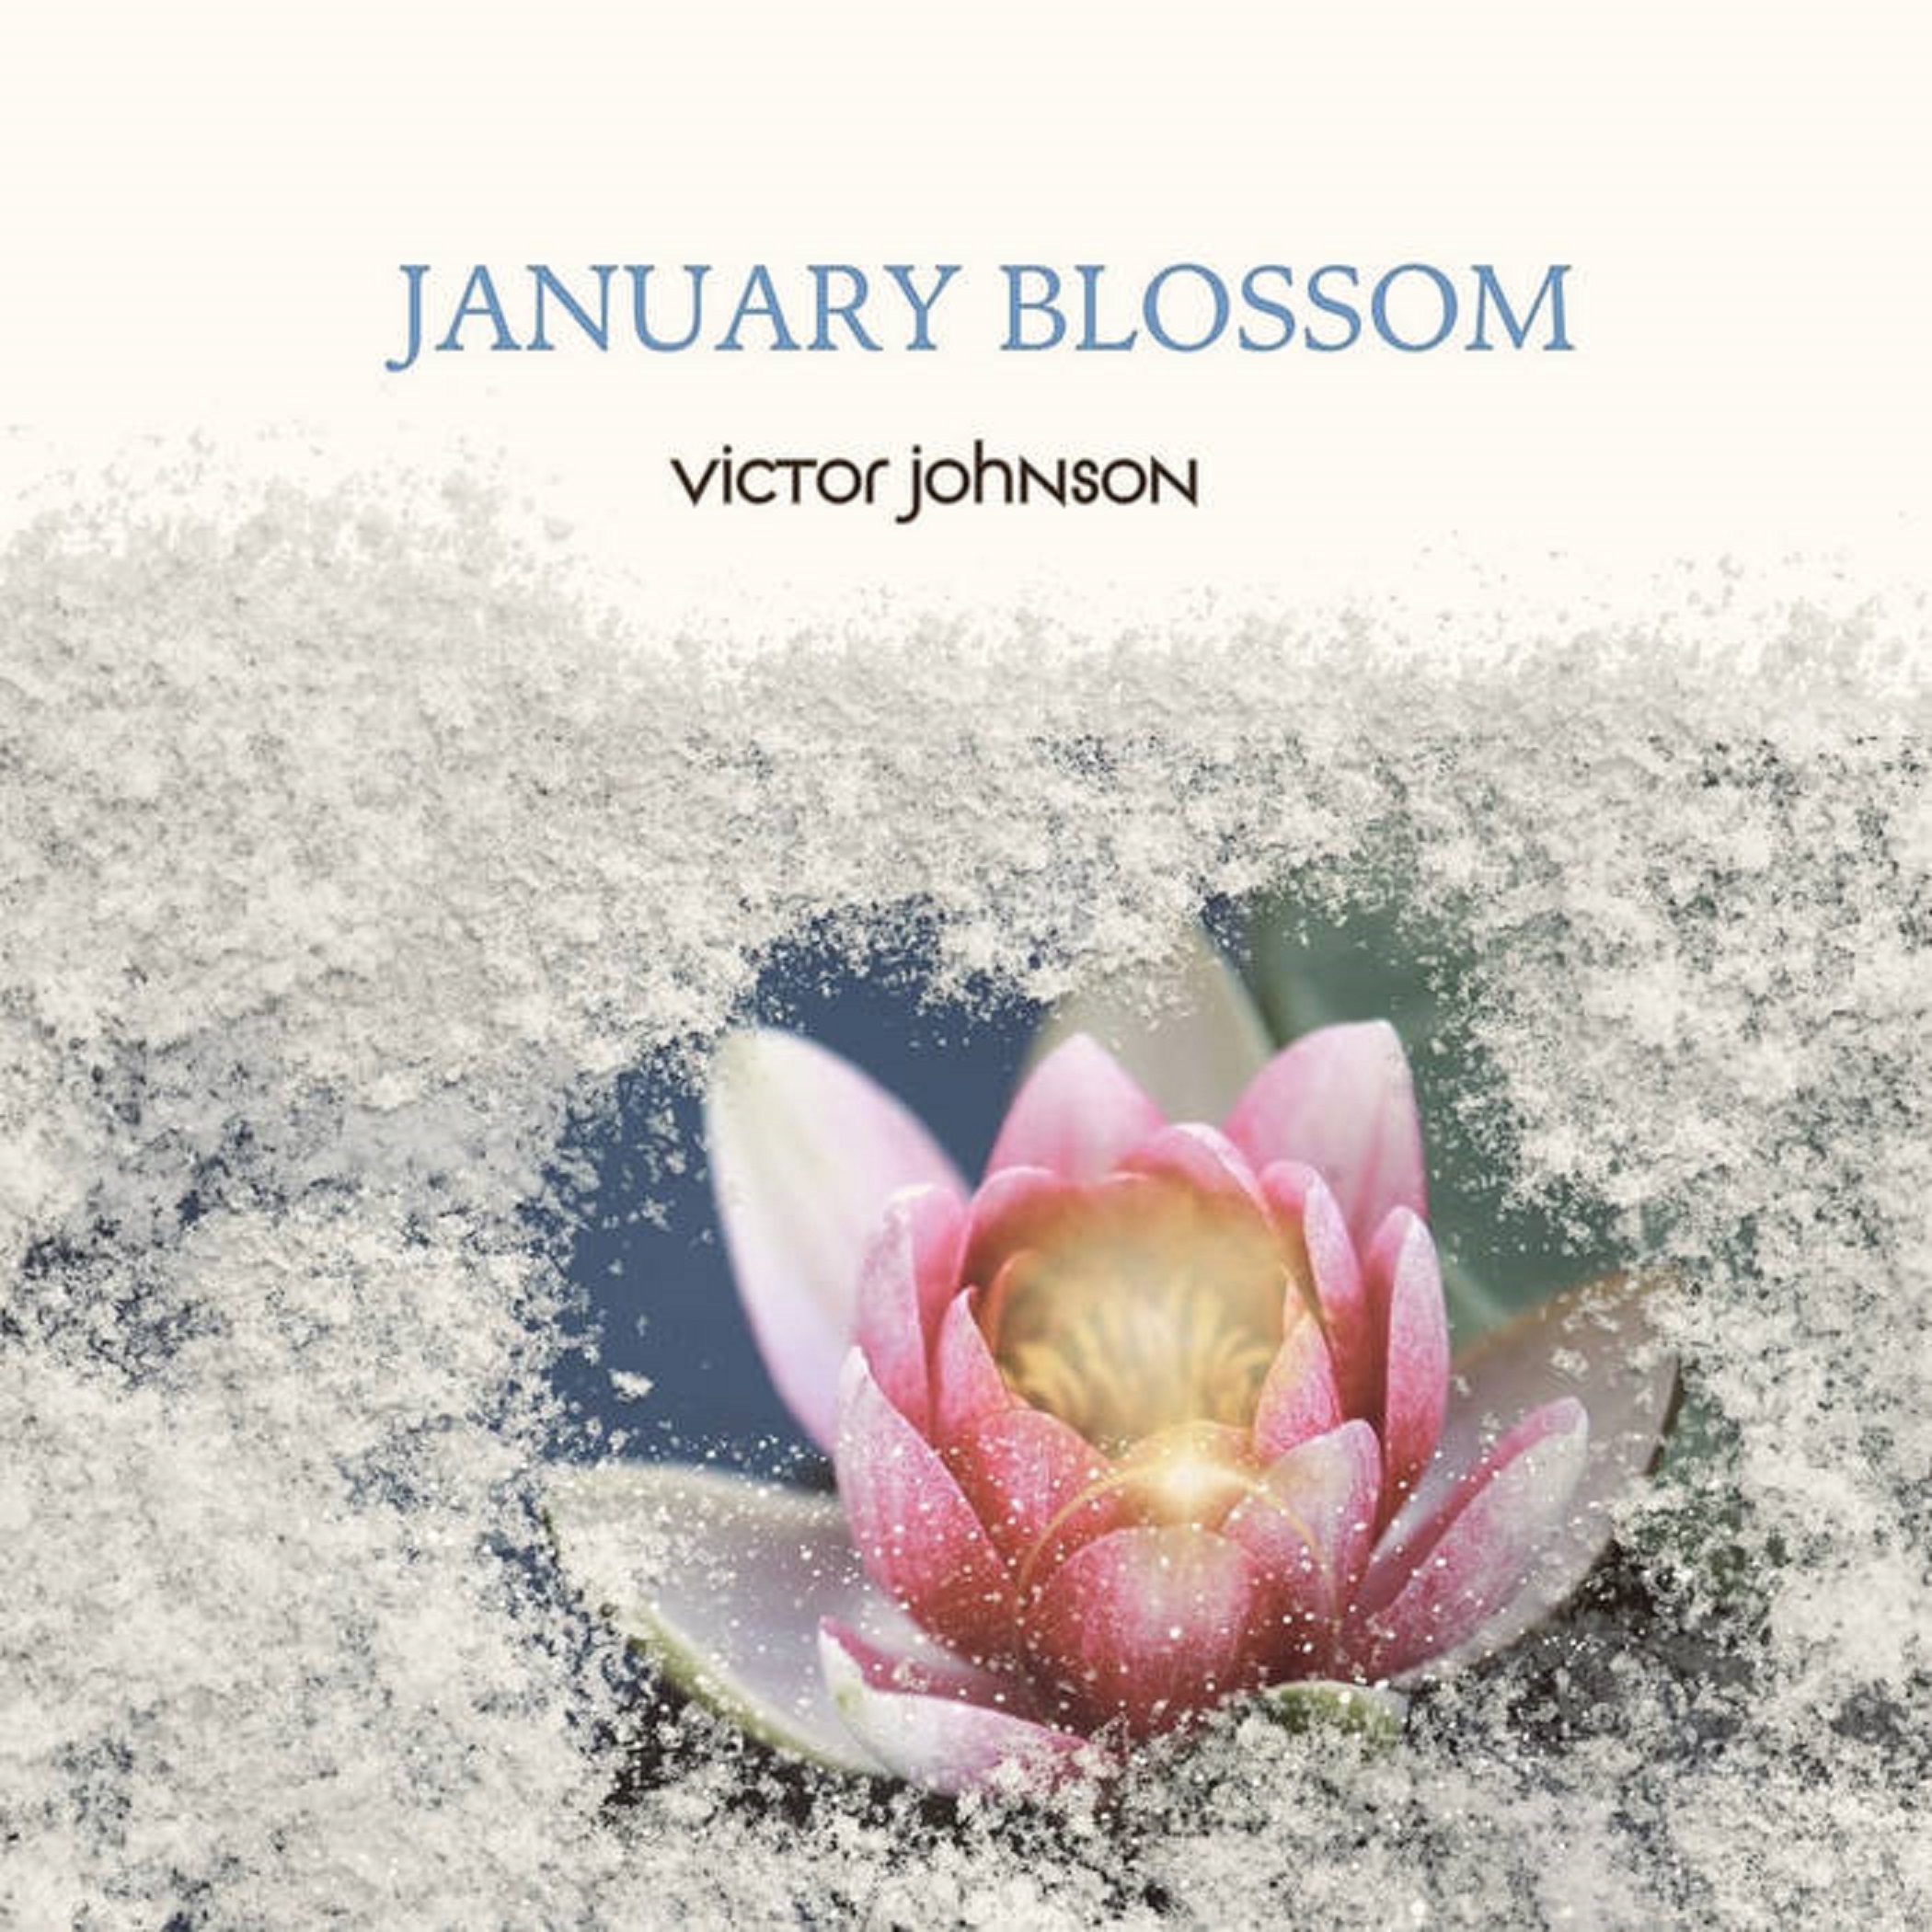 'January Blossom' - A New Musical Chapter from Bend's Acclaimed Singer/Songwriter Victor Johnson